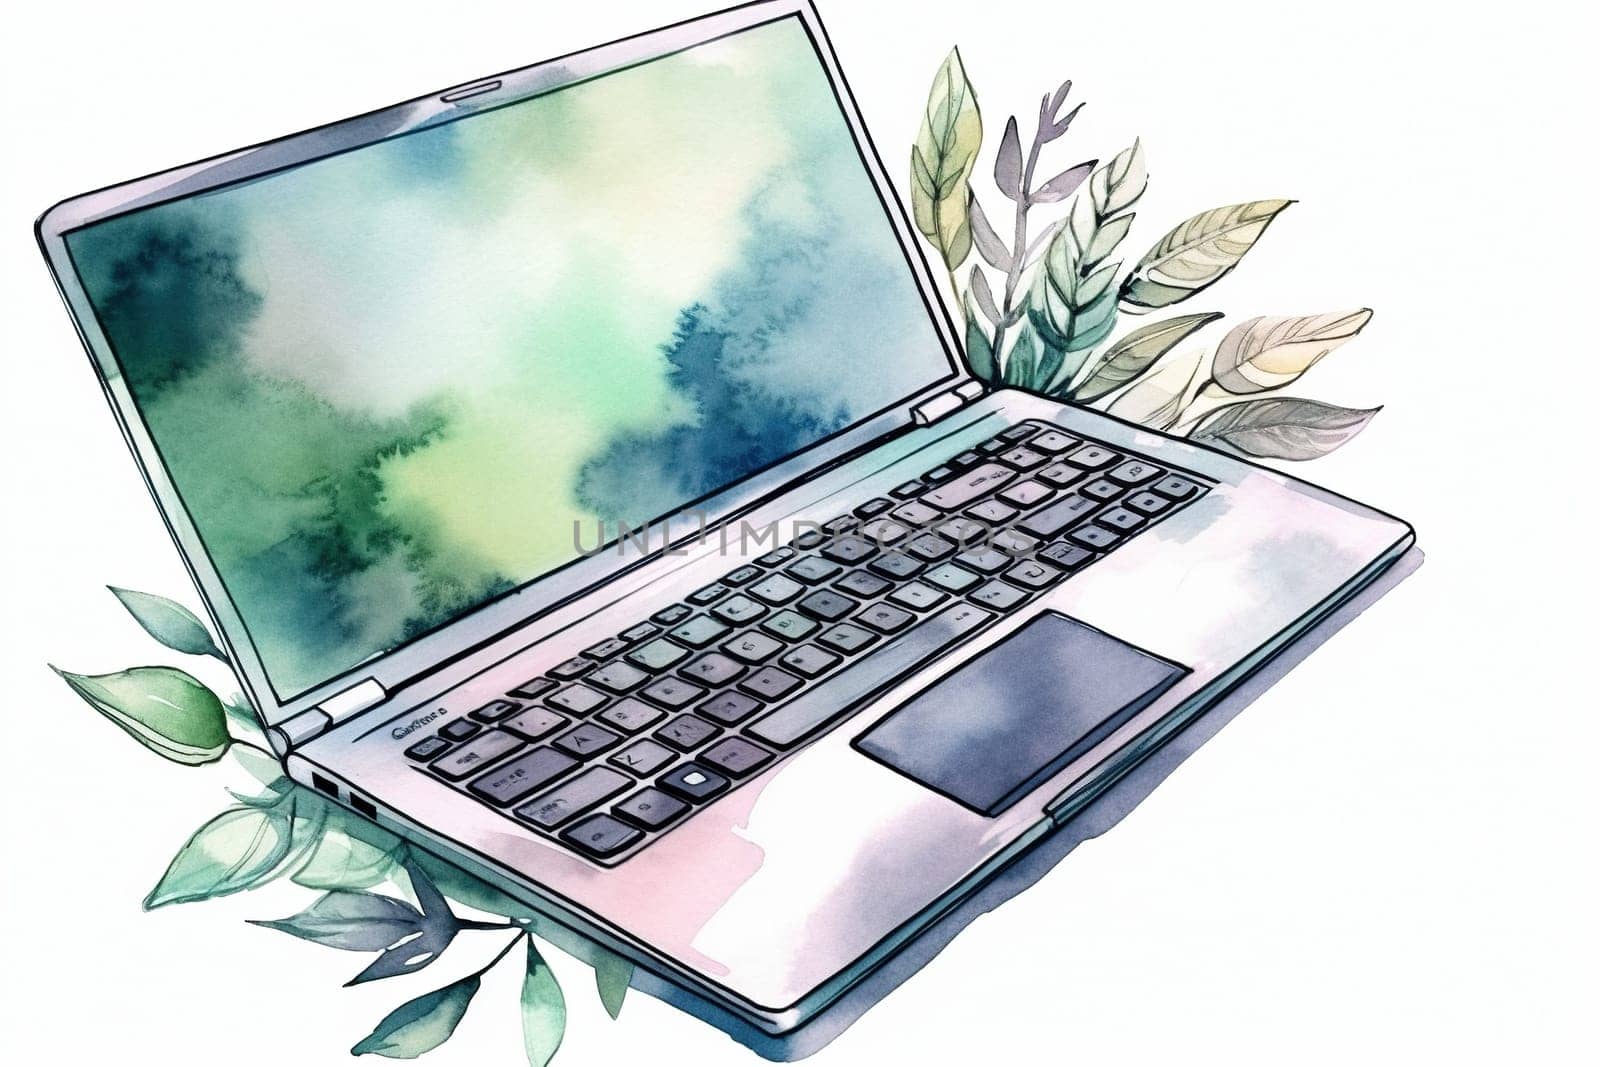 Watercolor Illustration Of Open Laptop With Colorful Screen On A White Backgound by GekaSkr